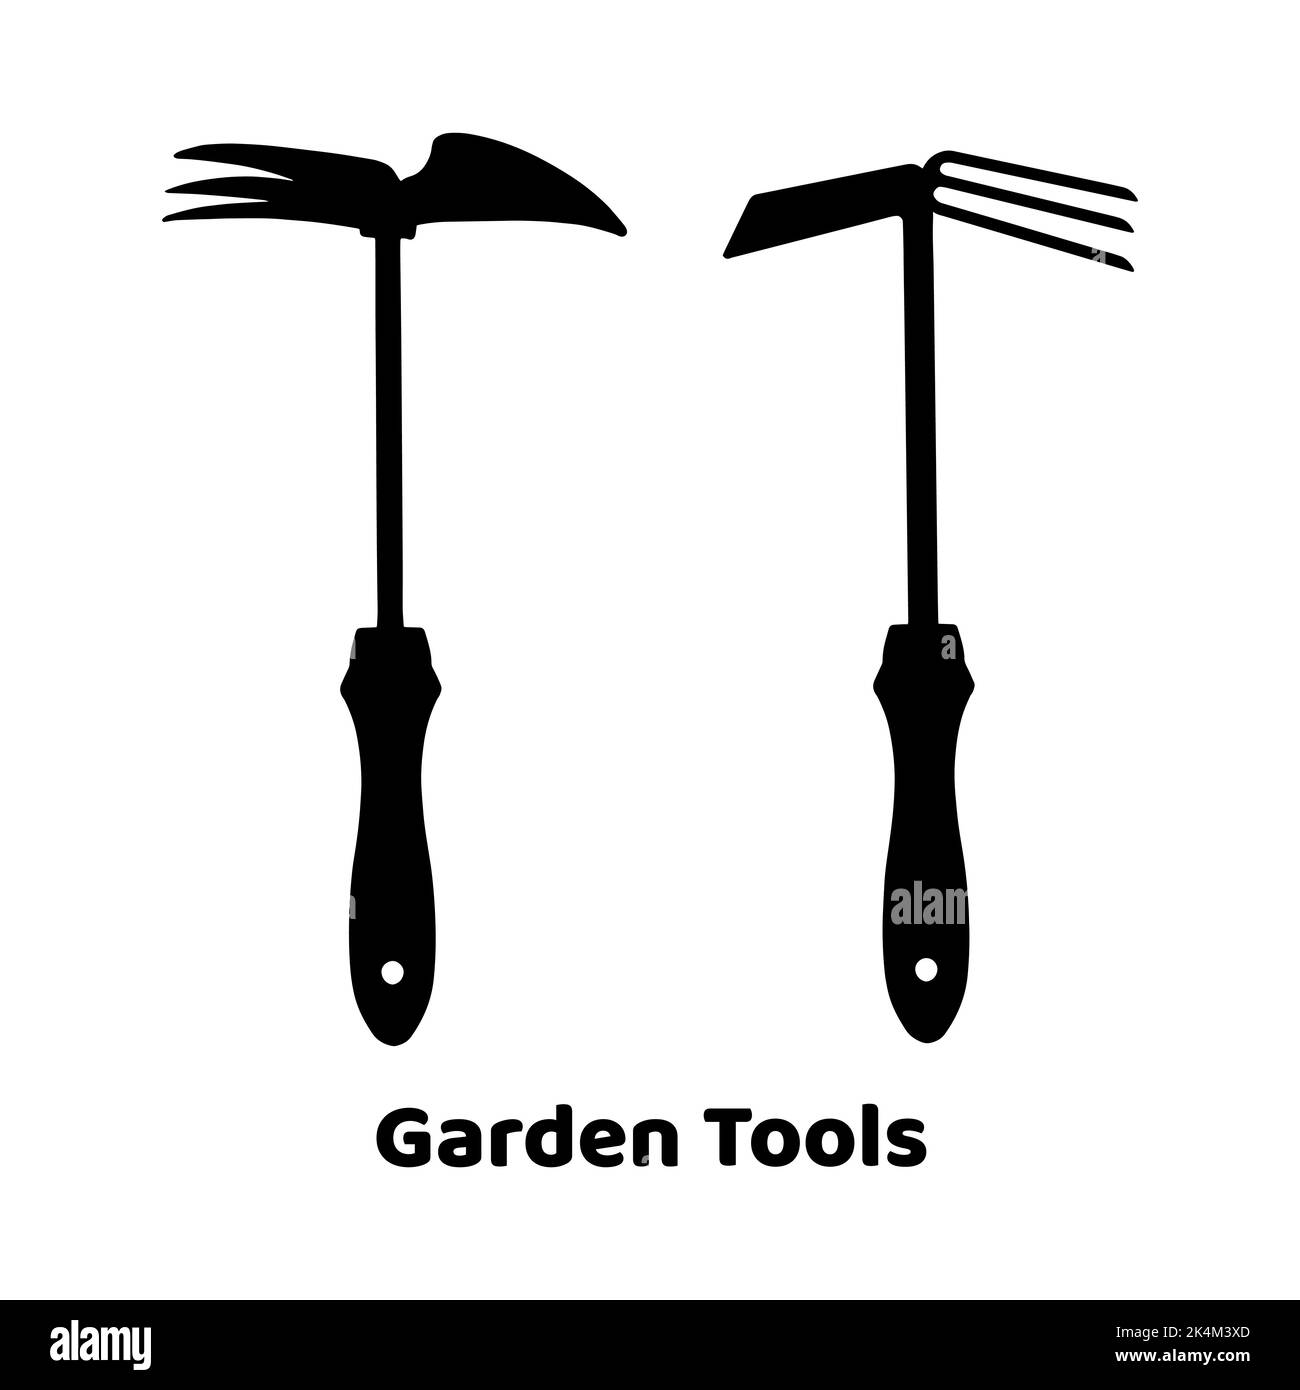 Chopper ripper manual set. Garden tools. Flat style icon. Isolated on white background. Vector. Stock Vector